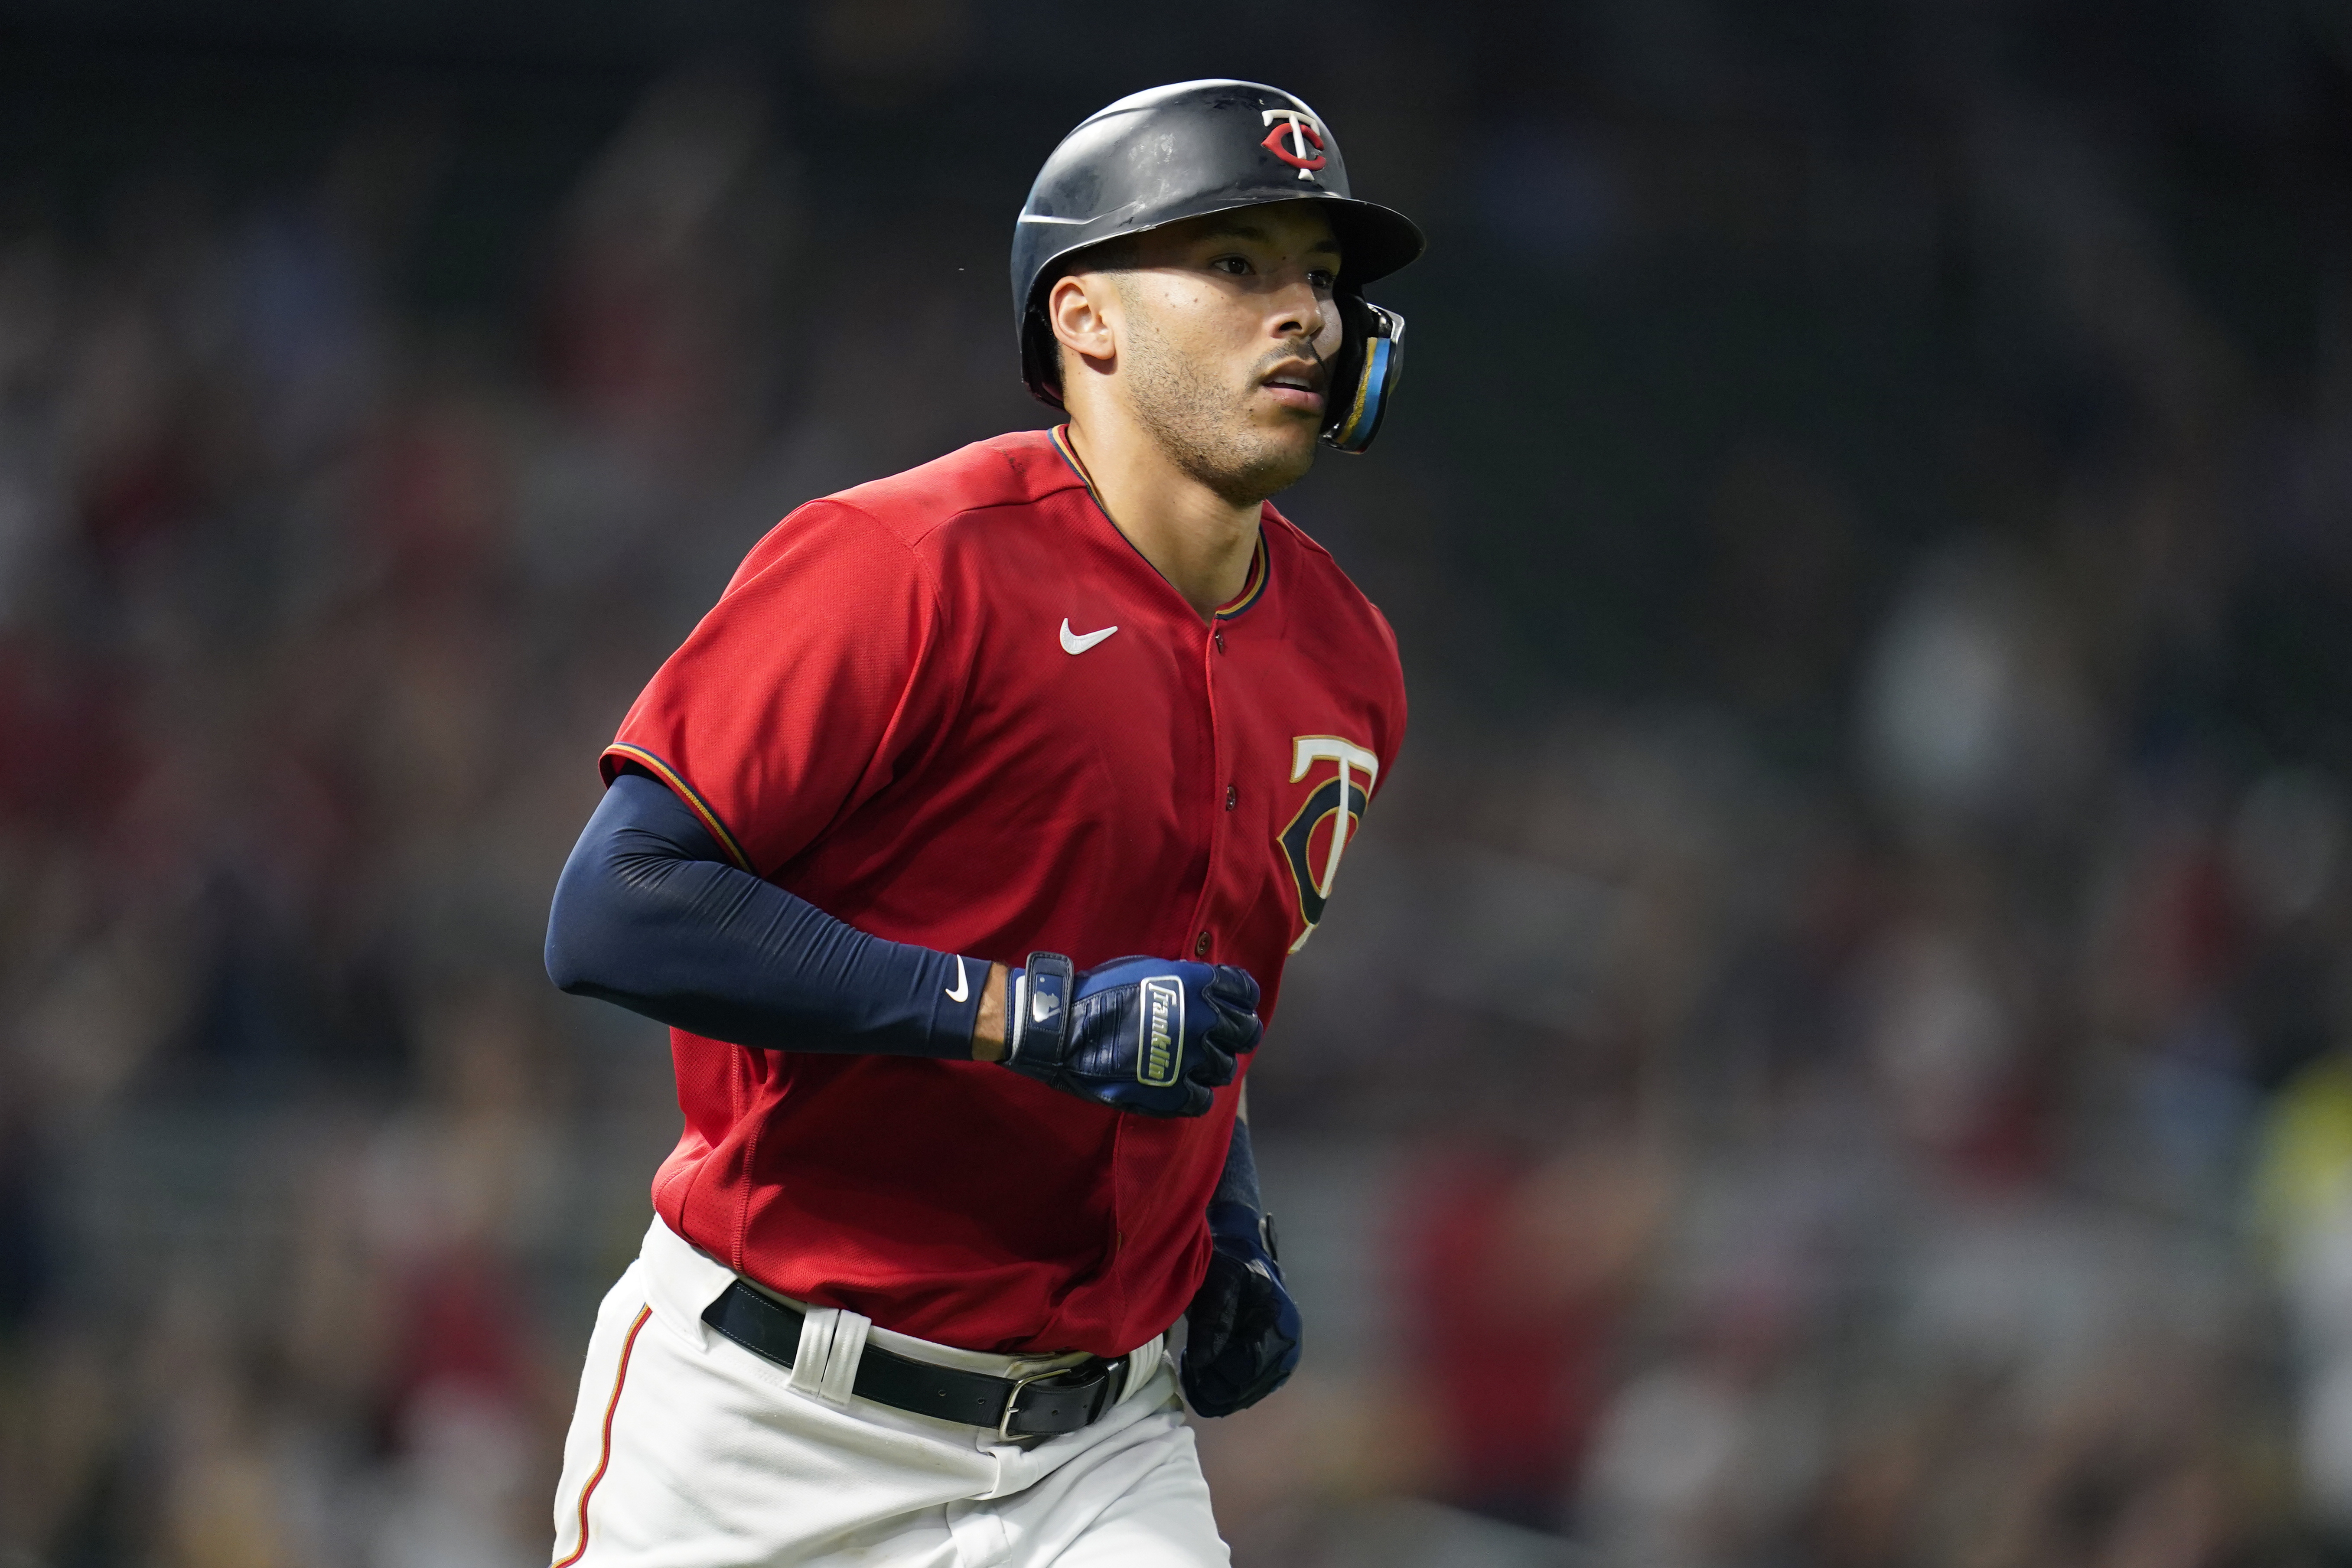 Carlos Correa agrees to 13-year, $350 million contract with Giants